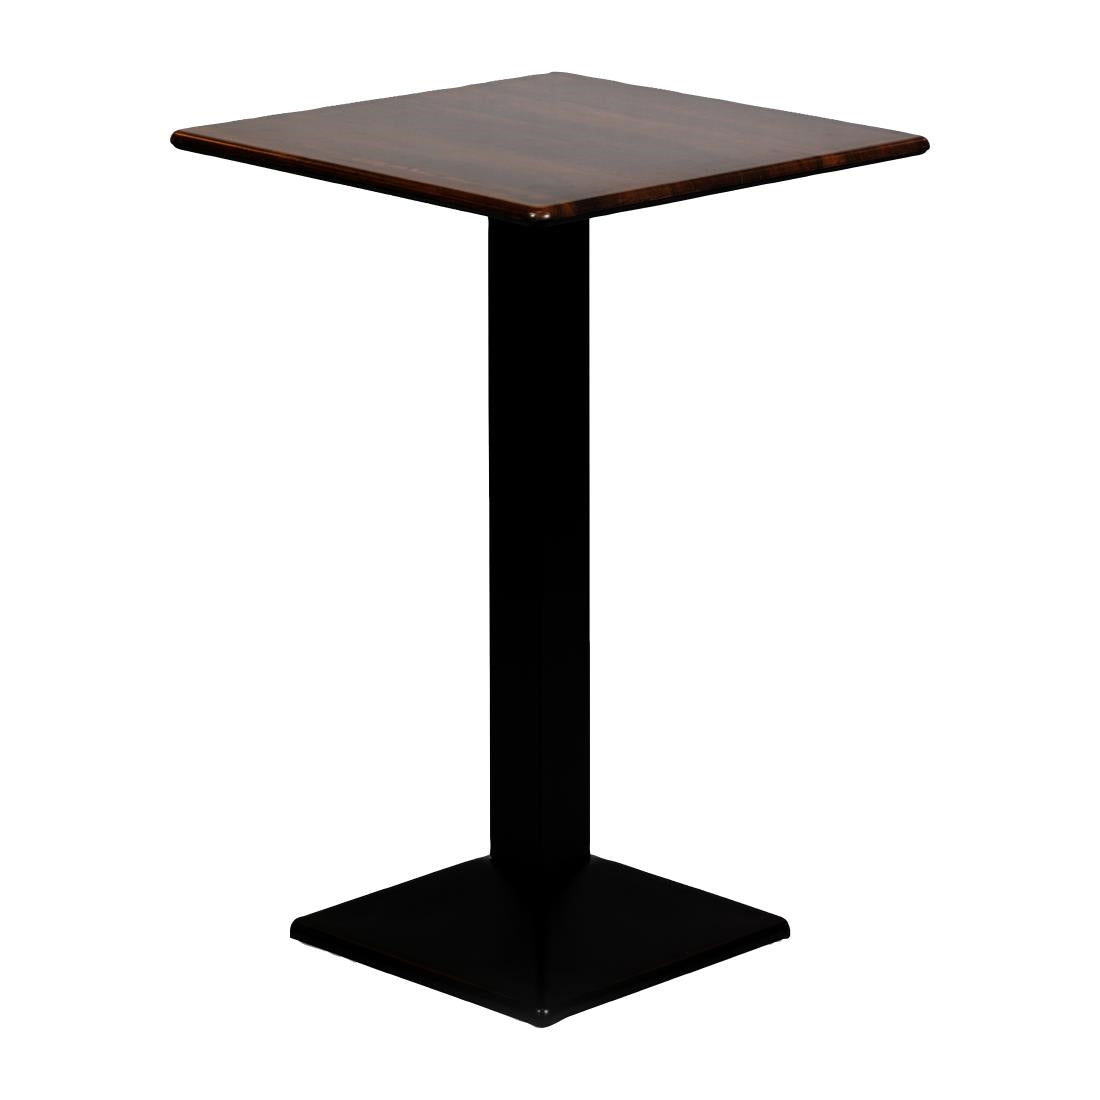 CZ833 Turin Metal Base Square Poseur Table with Laminate Top Walnut 700mm JD Catering Equipment Solutions Ltd